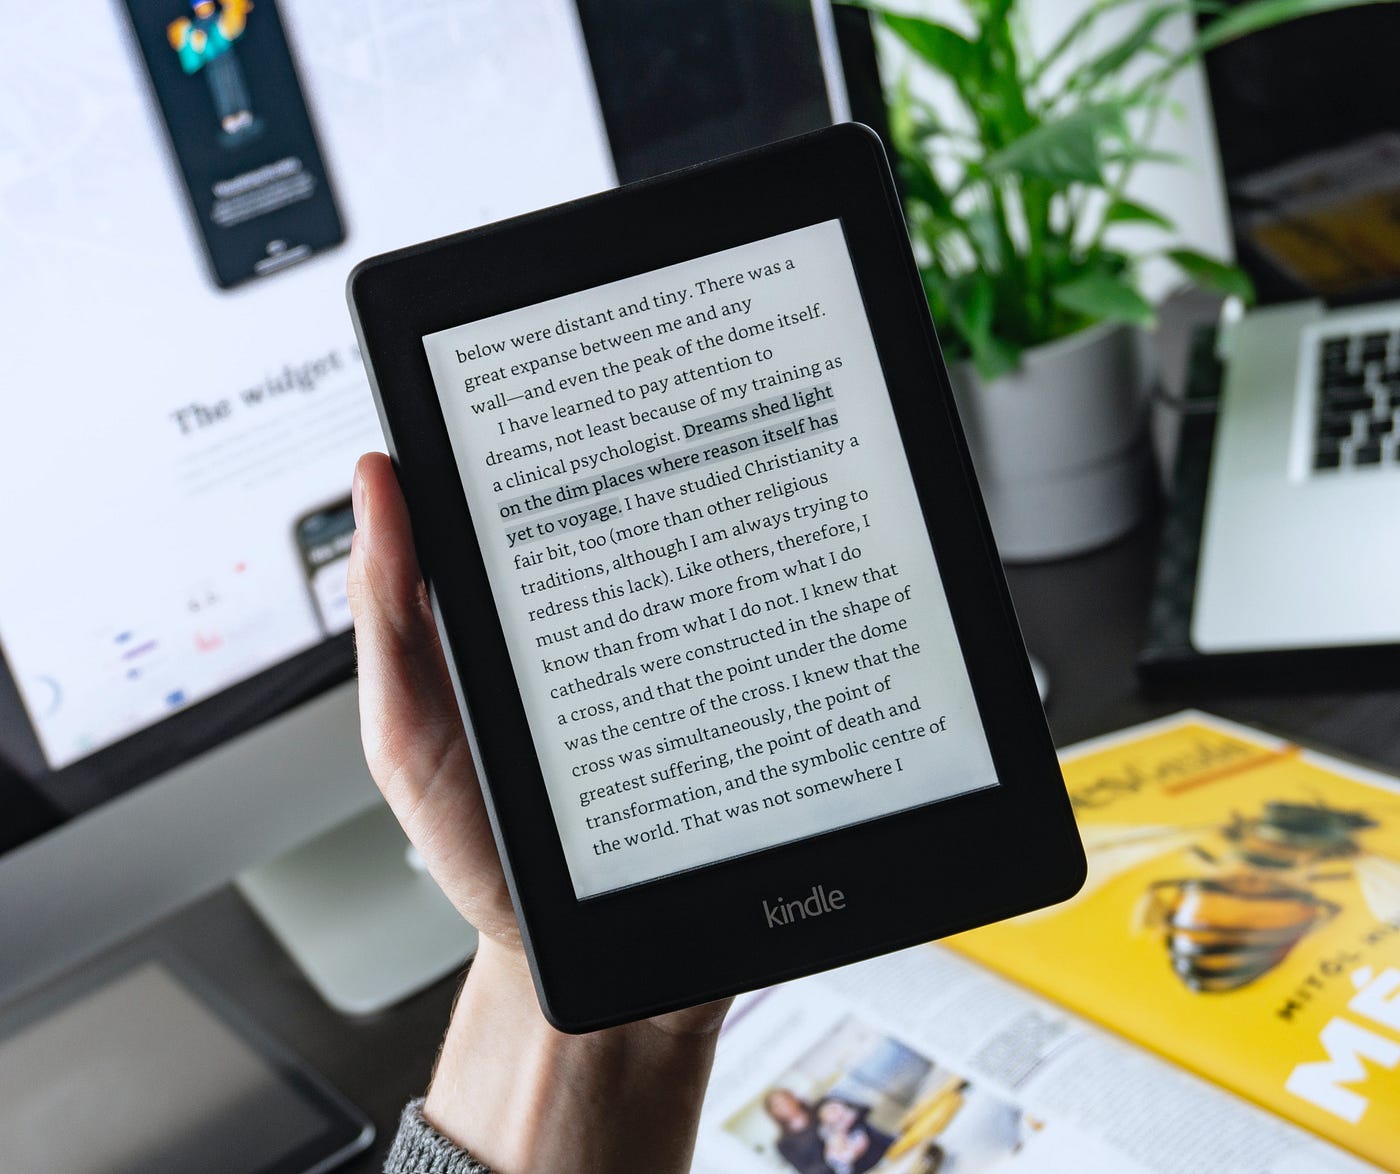 Discover the benefits of  Kindle Paperwhite - it's better than a book?